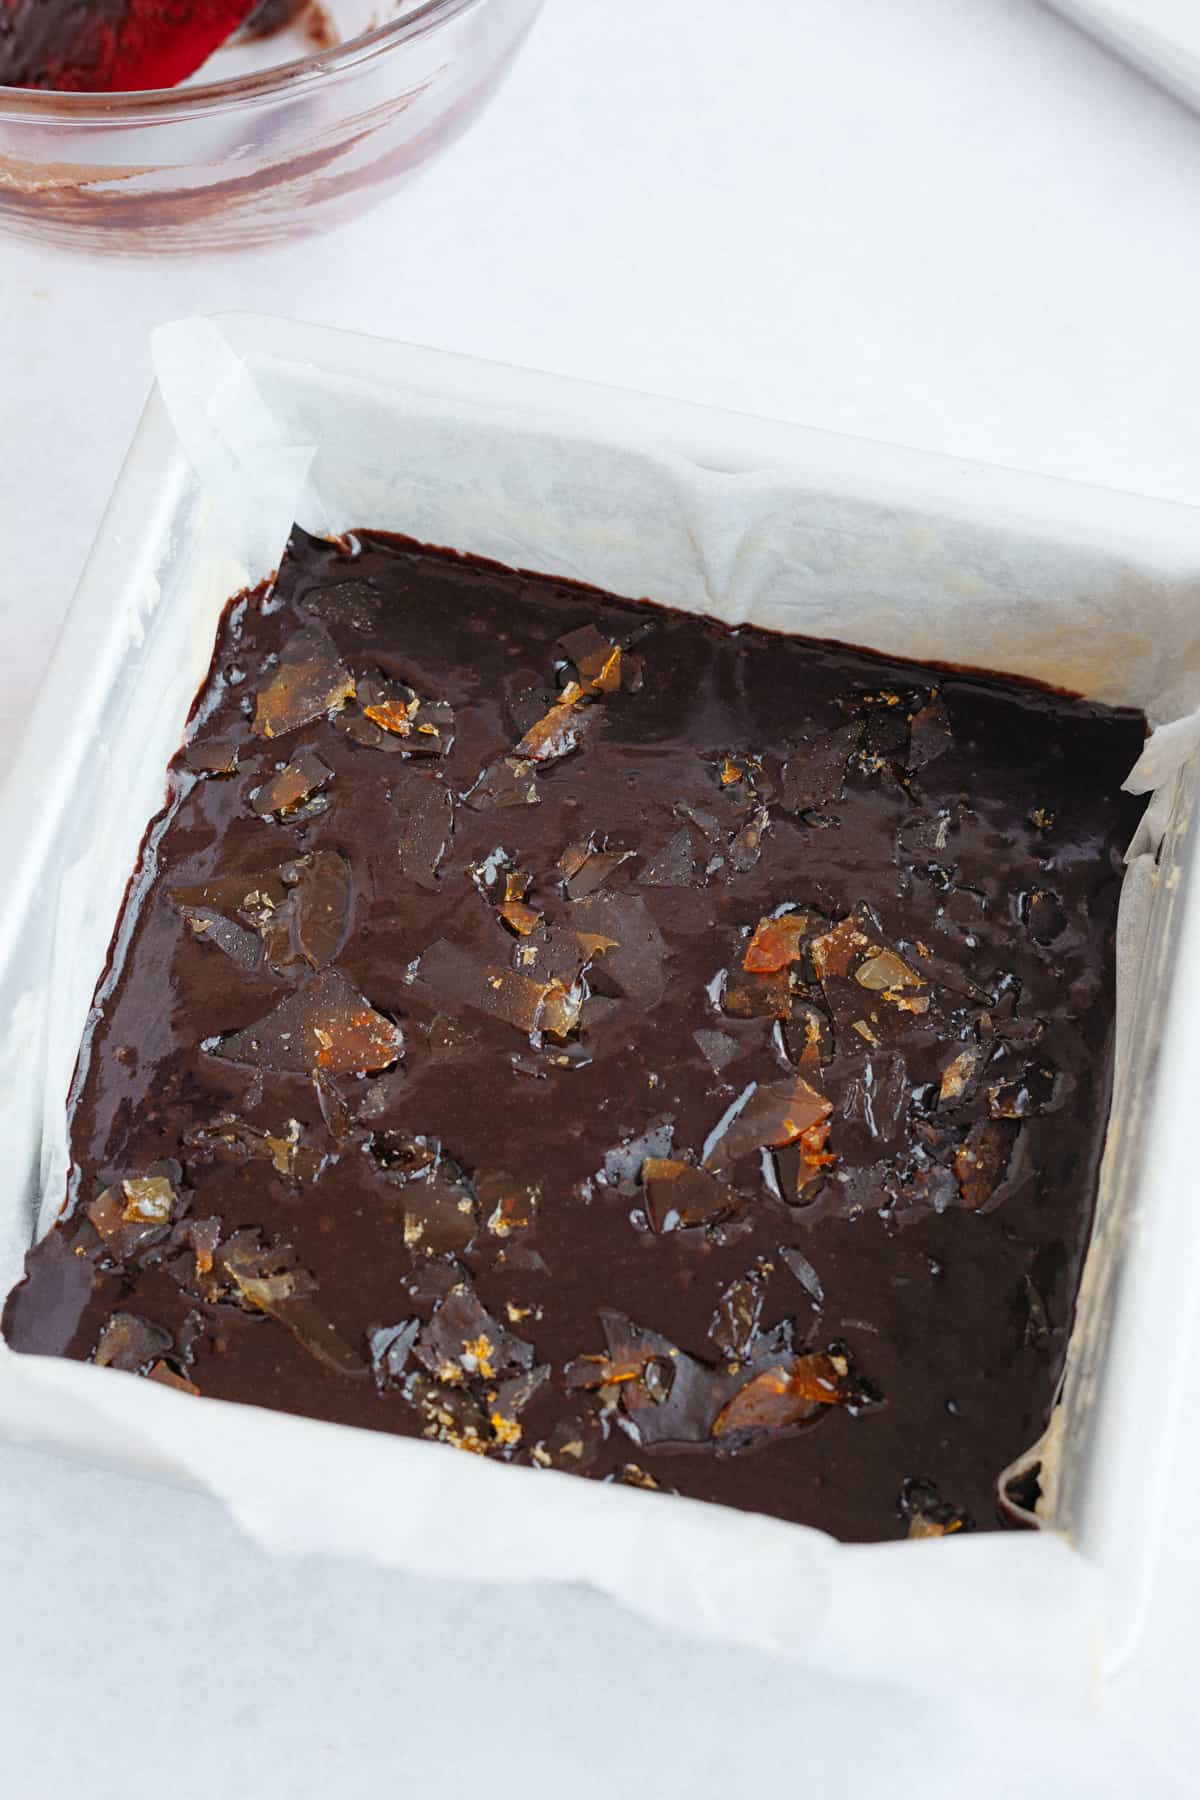 An 8x8 baking tin with unbaked brownie batter and caramel shards sprinkled on top